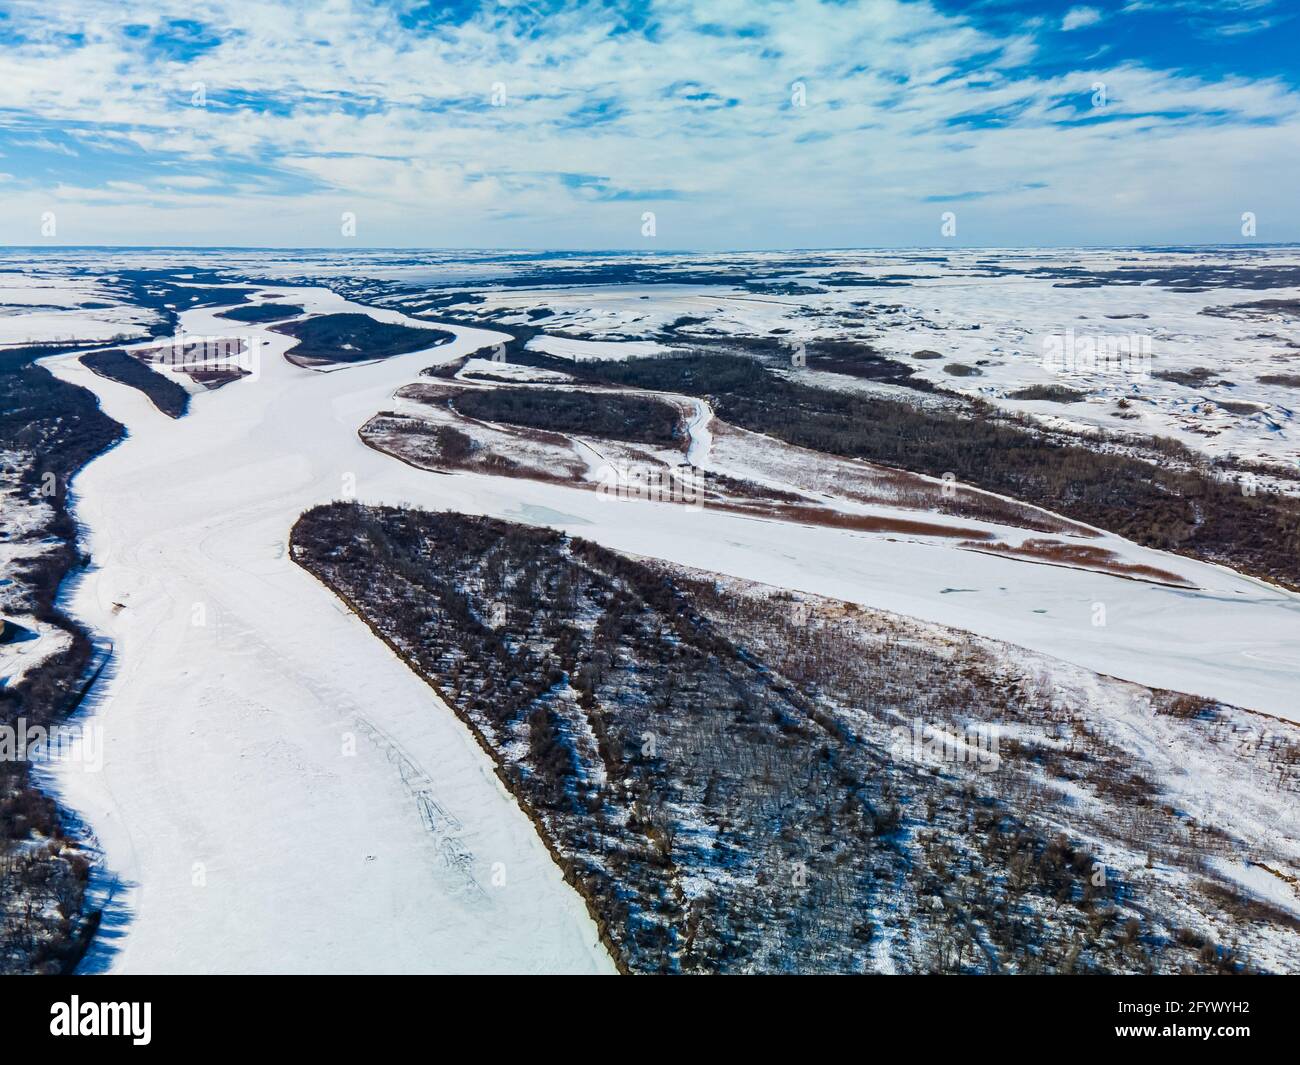 Aerial view of the North Saskatchewan River in a rural area of the prairies during the winter. Stock Photo